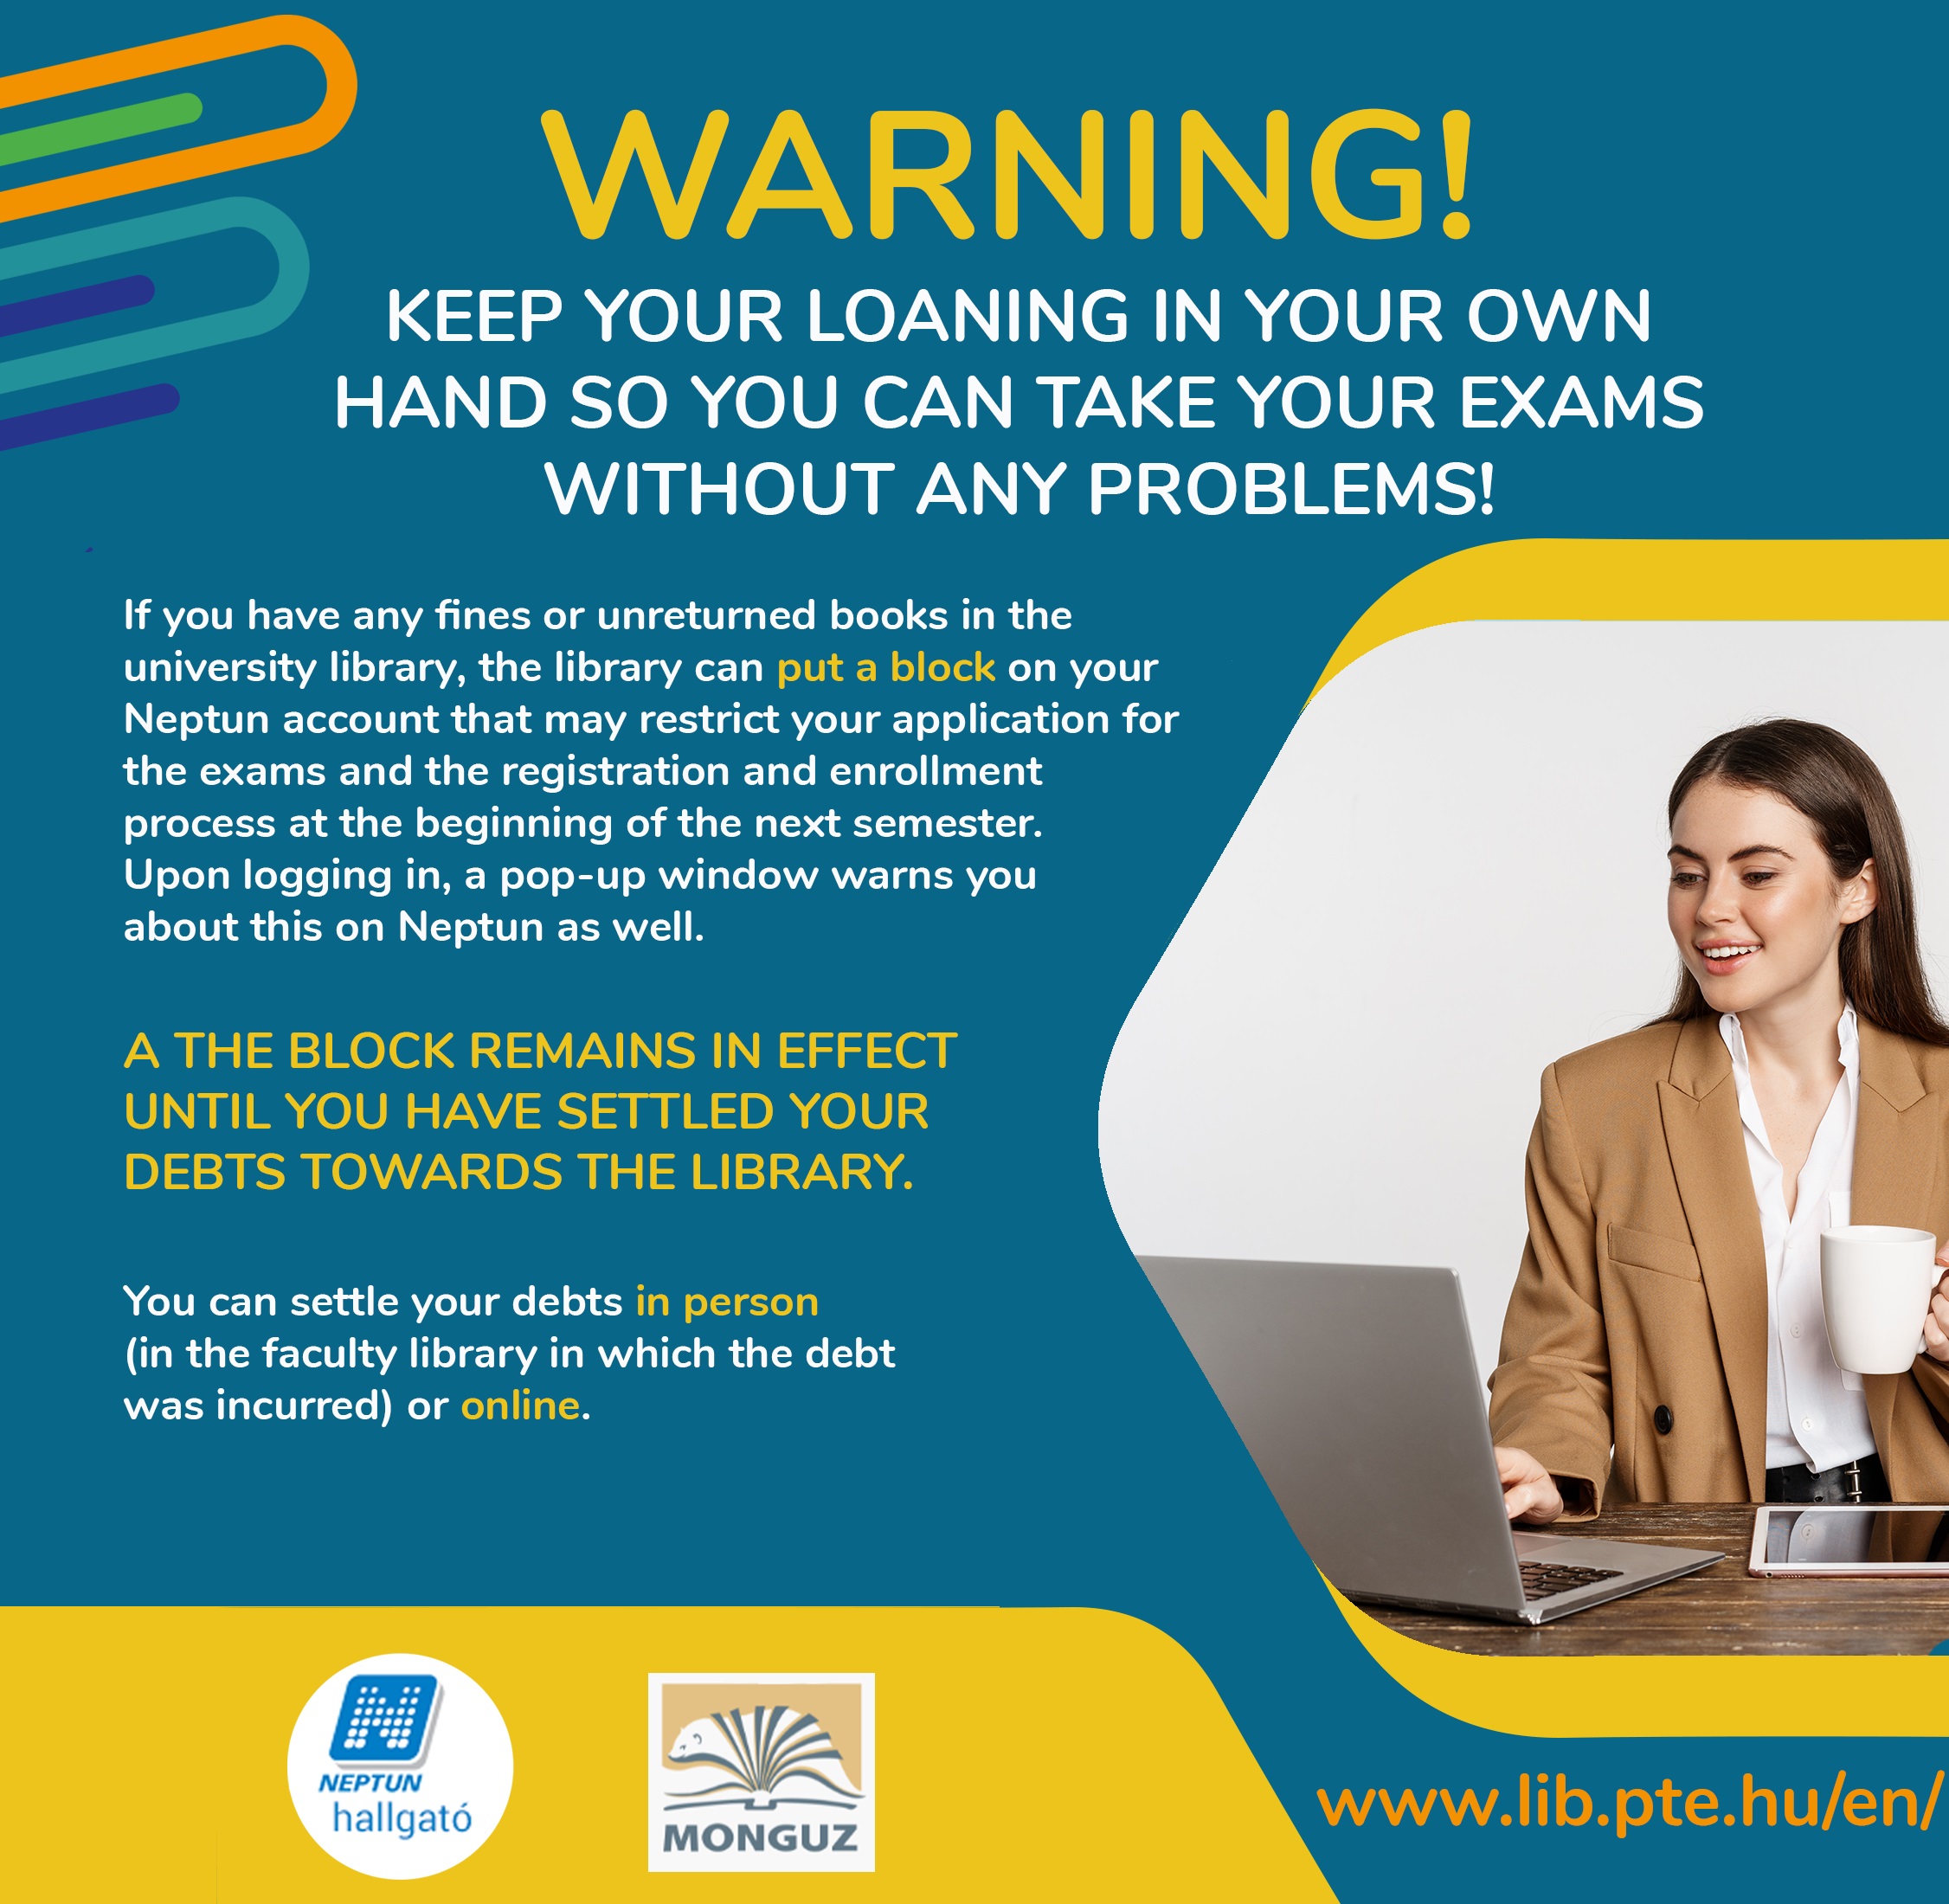 Keep your loaning in your own hand so you can take your exams without any problems!